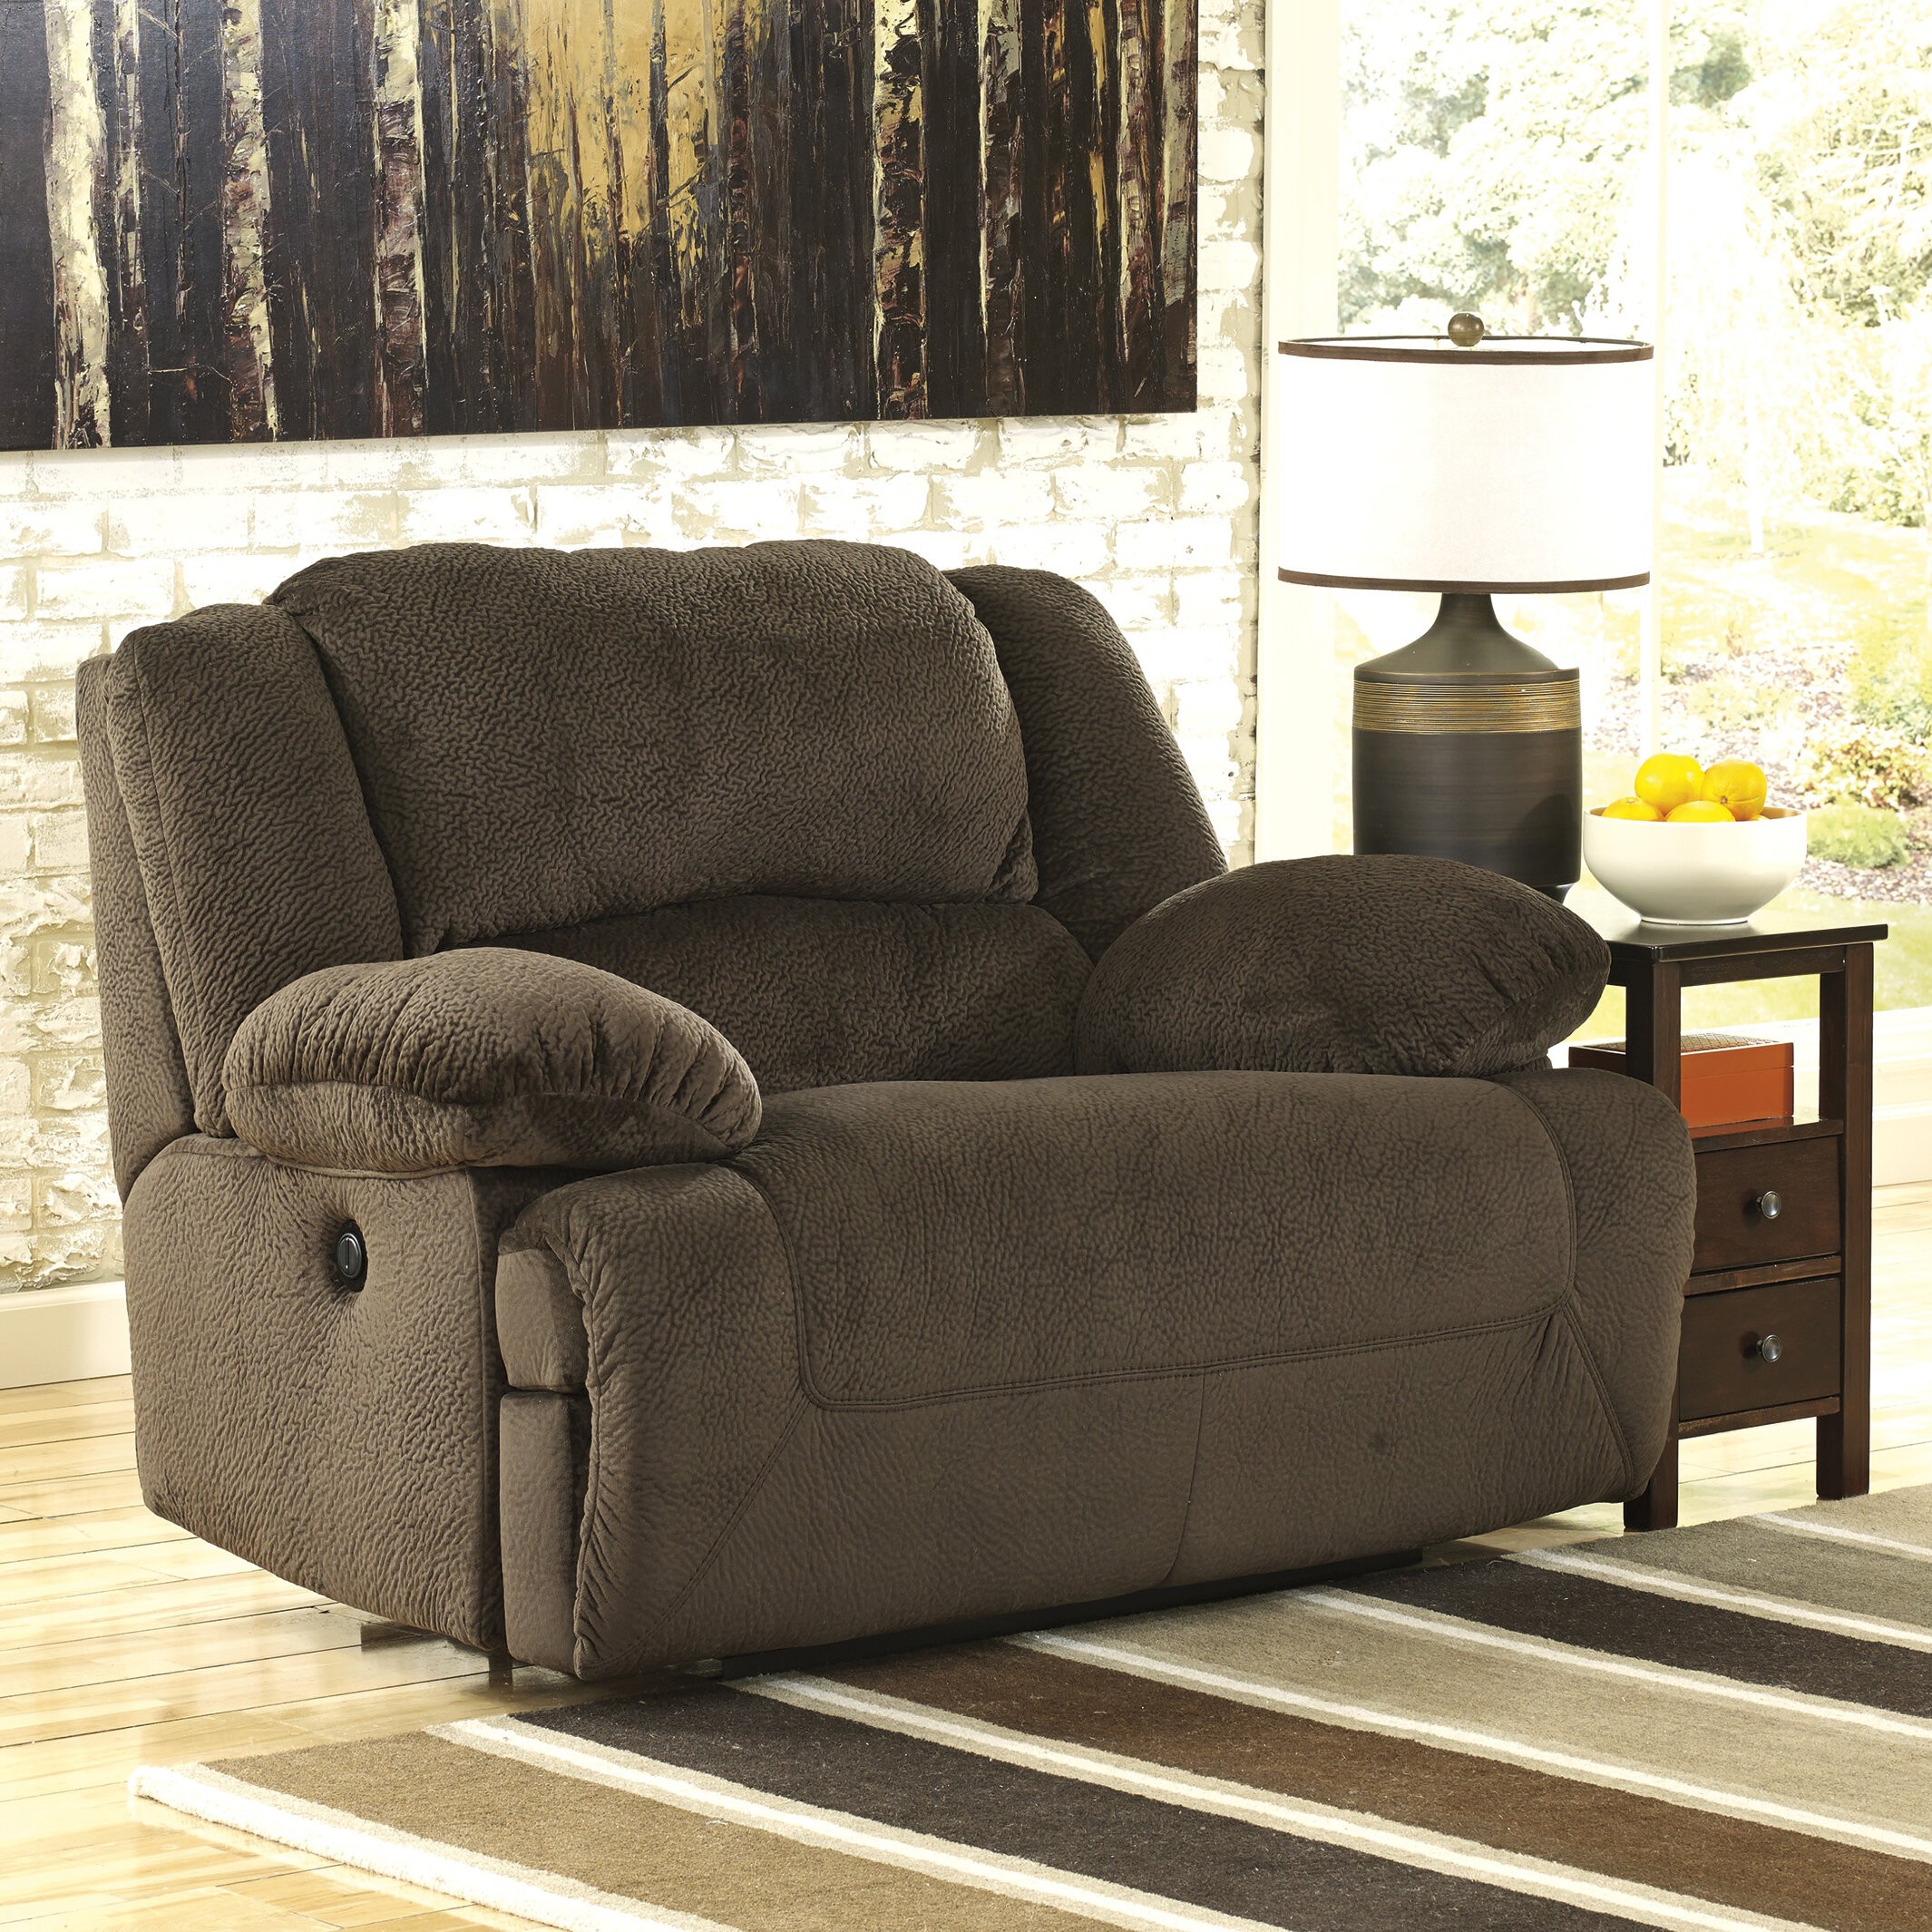 Double chair recliner